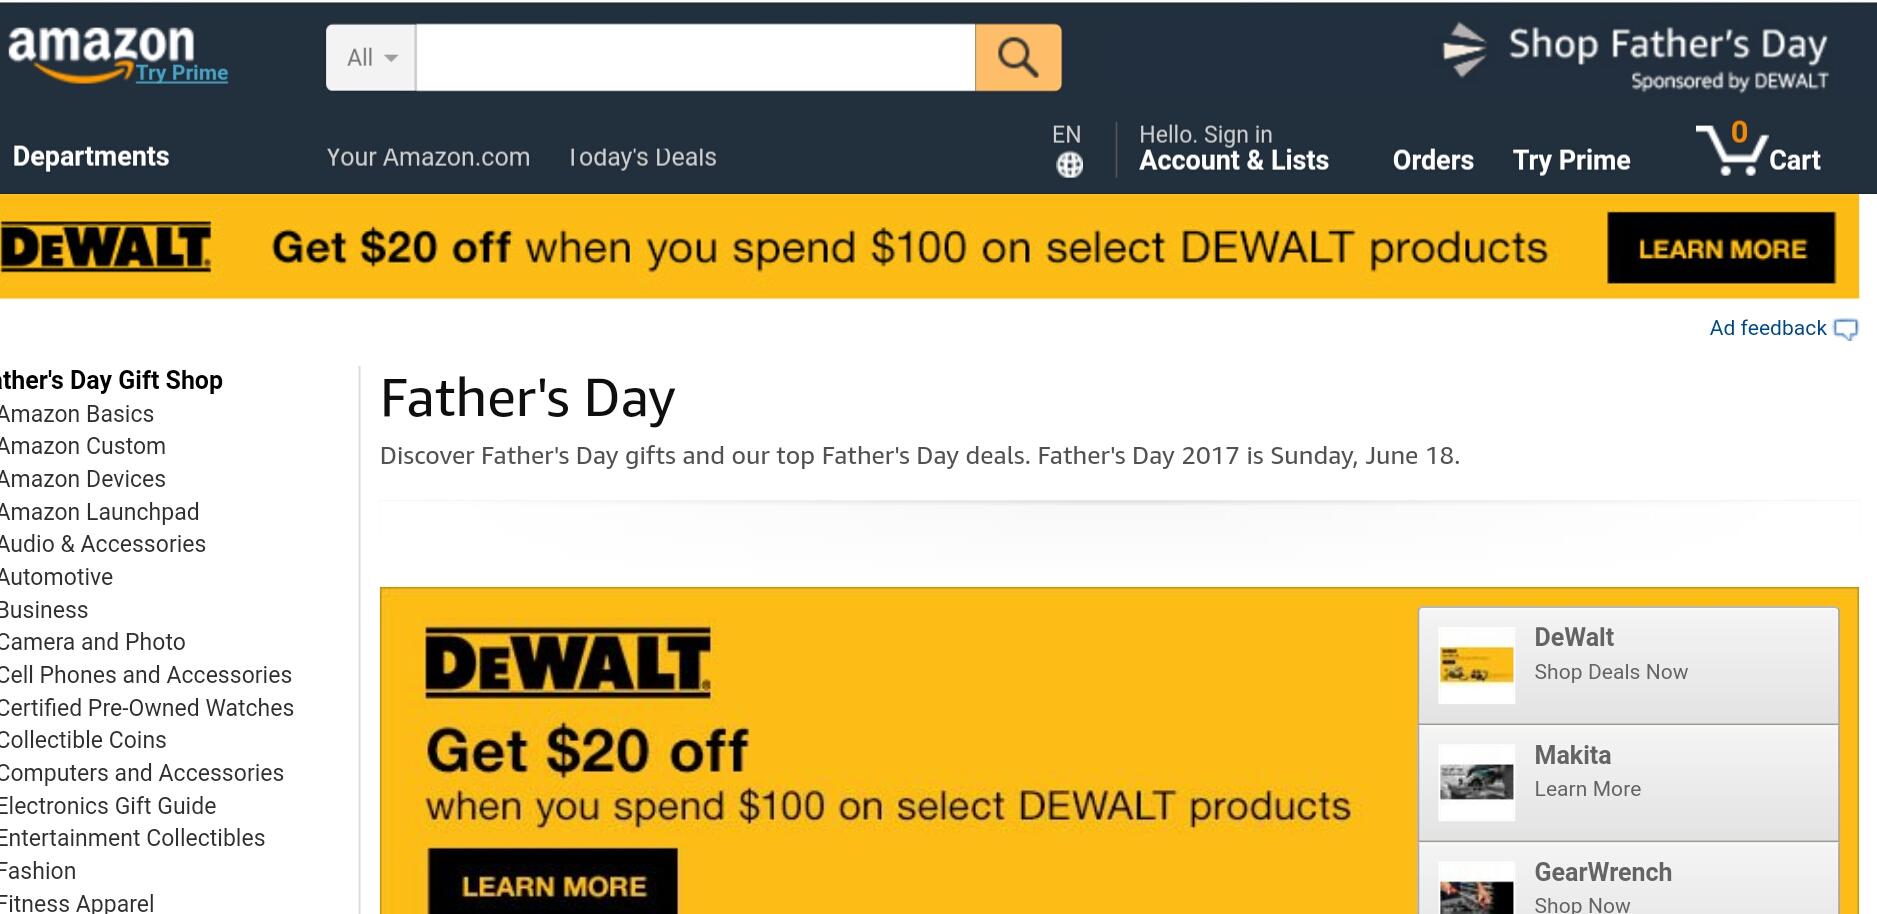 Deal Alert: Amazon cuts off prices for Alexa and Kindle devices ahead of Father's Day 7